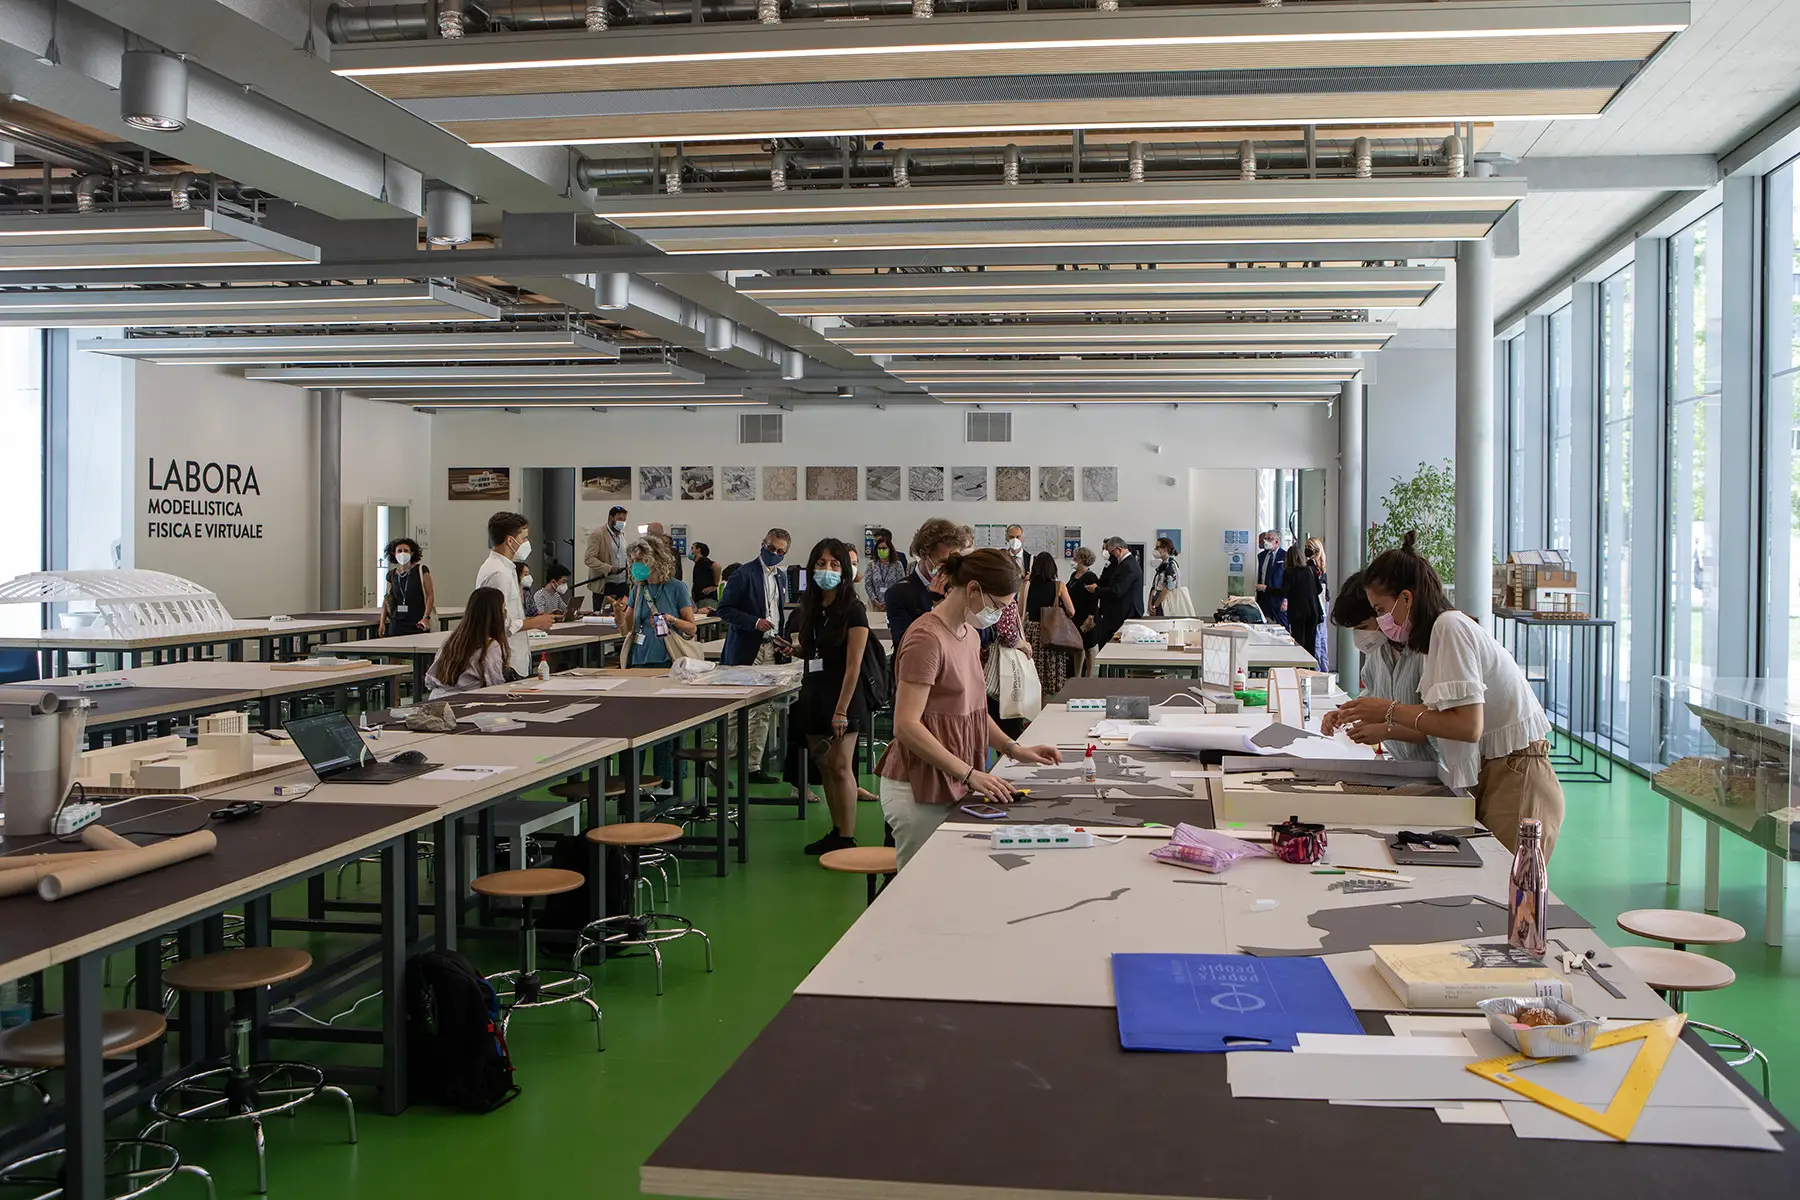 Architecture students working in a studio at Politecnico di Milano, all wearing masks